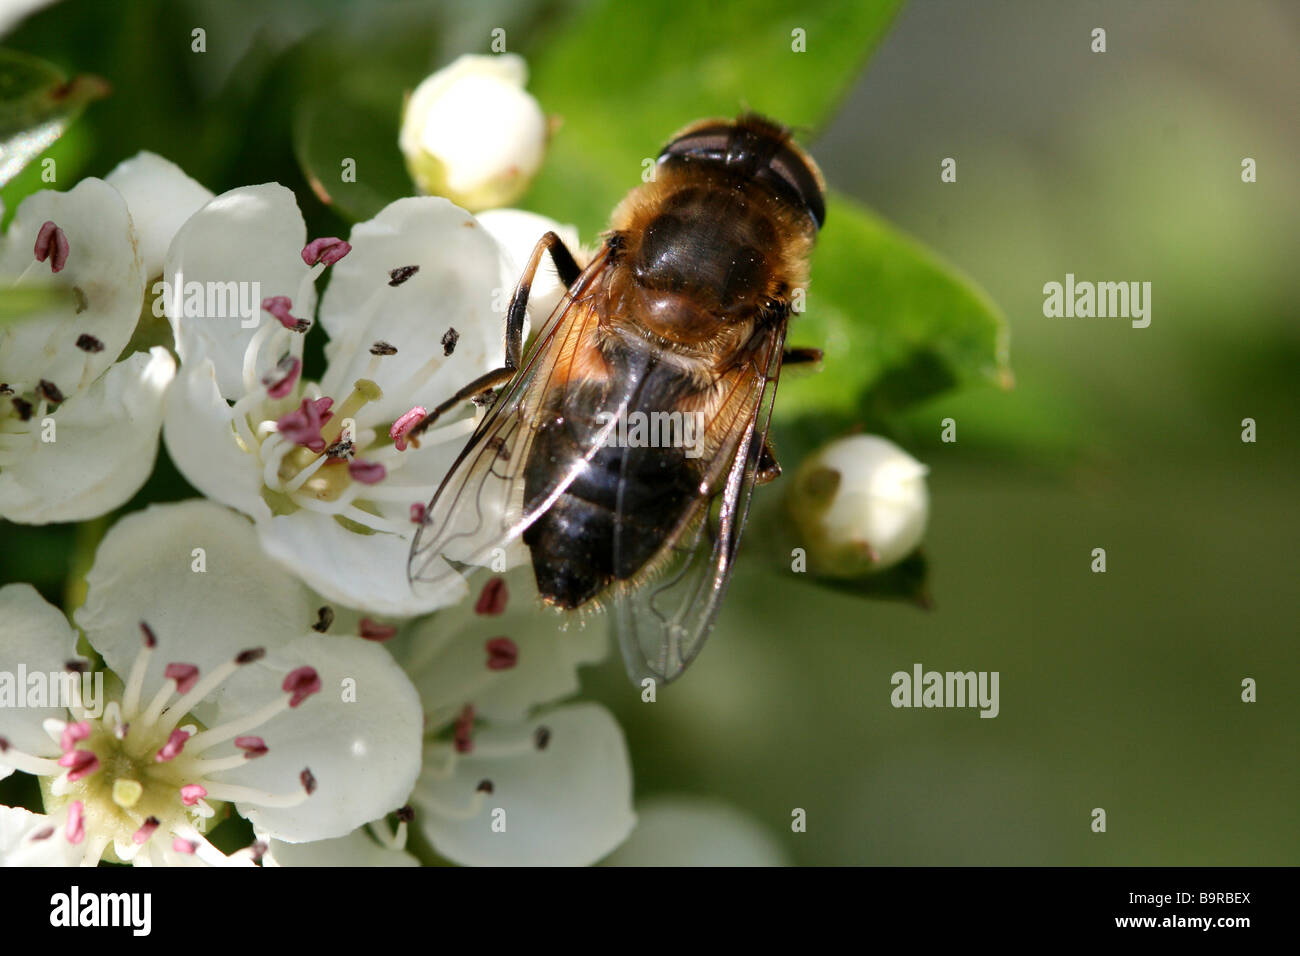 A Hover Fly visits the Flowers of Hawthorn early in the year Stock Photo